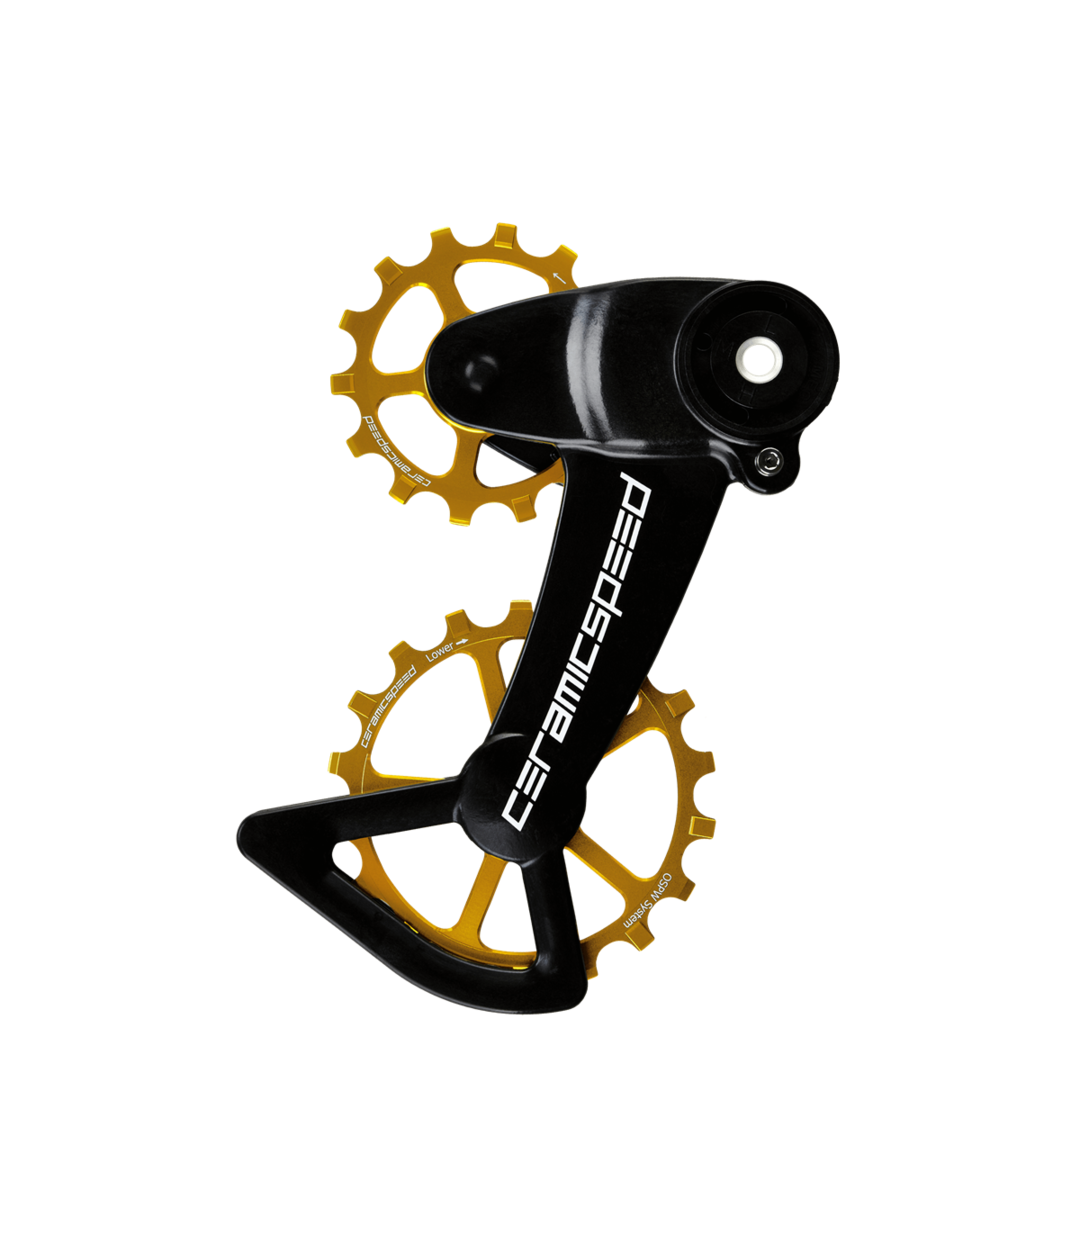 CERAMICSPEED Oversized Pulley Sram Axs Eagle - Gold